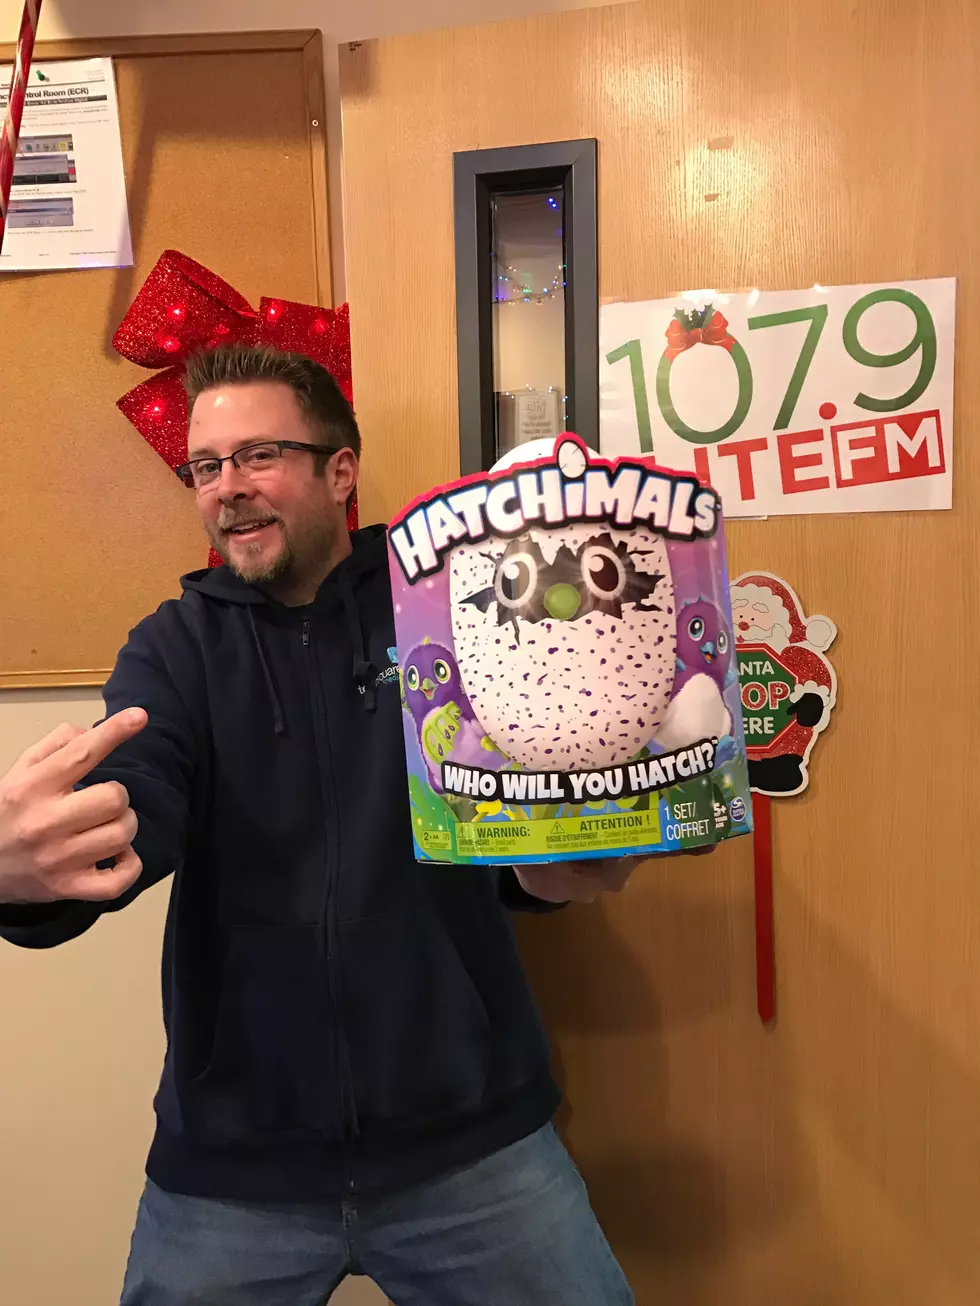 Do You Need A Hatchimal This Year?  You Can Get One And Help Christmas Wish At The Same Time